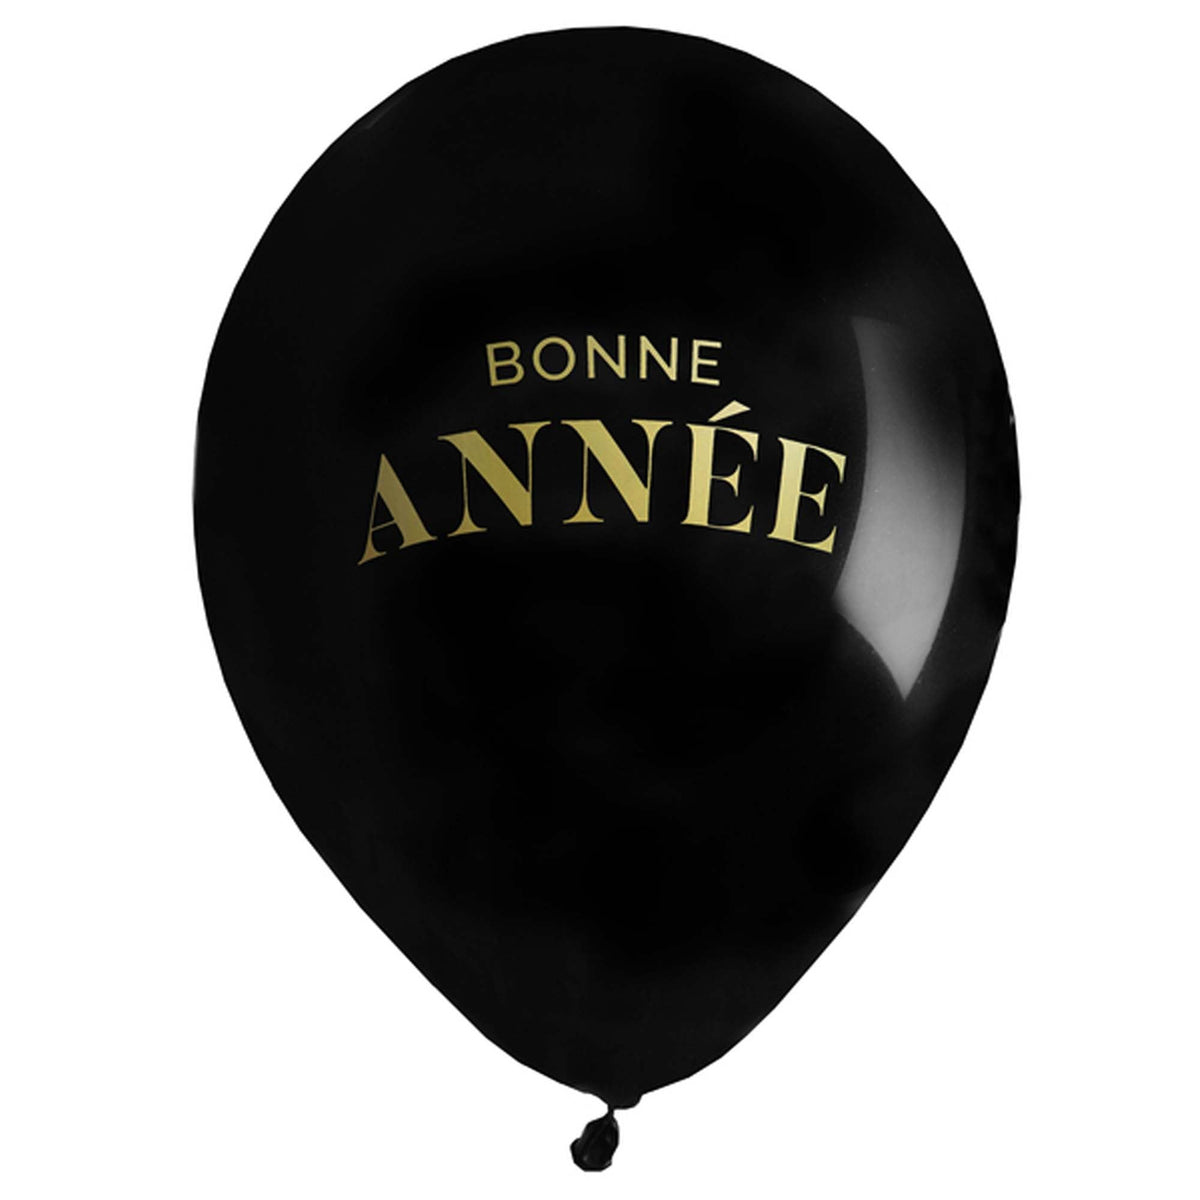 SANTEX New Year "Bonne Année" Printed Latex Baloons, 12 Inches, 6 Count